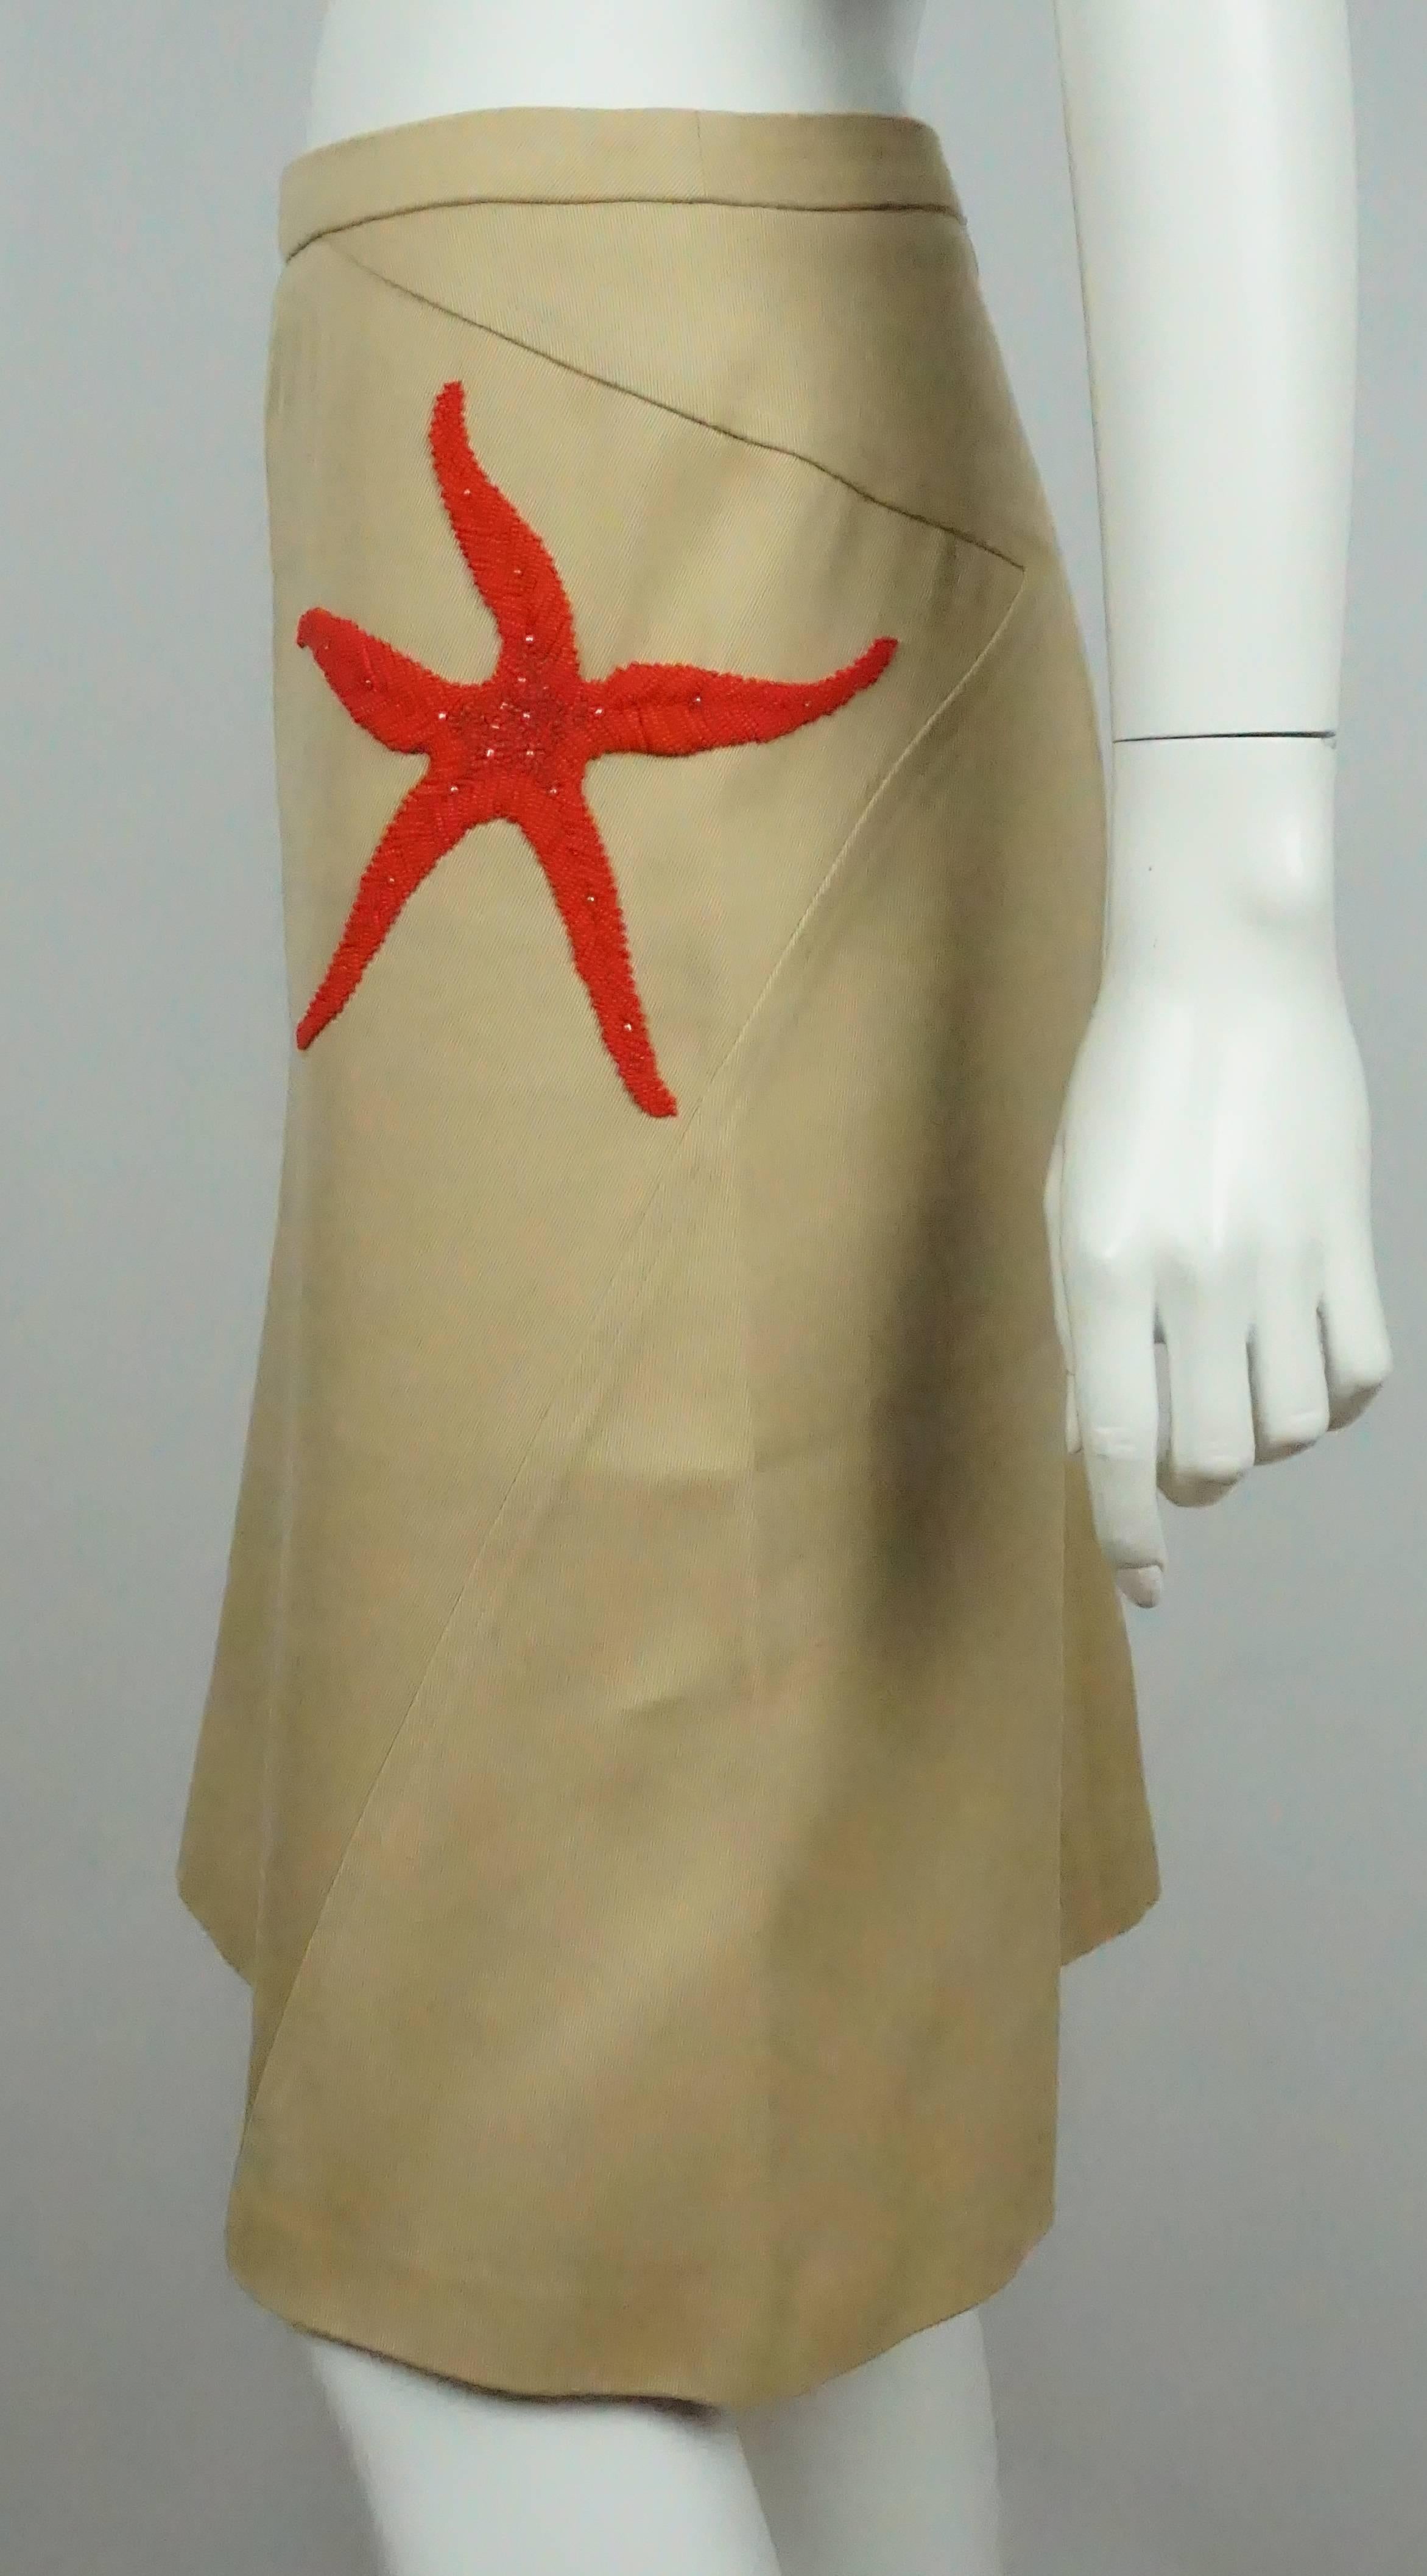 Valentino Tan Cotton Skirt W/ Red Beaded Starfish - 42  This simple skirt is in good condition. The skirt is completely made from cotton and has a red embroidery starfish on the left hip that is made out of beads. The skirt is made asymmetrically so